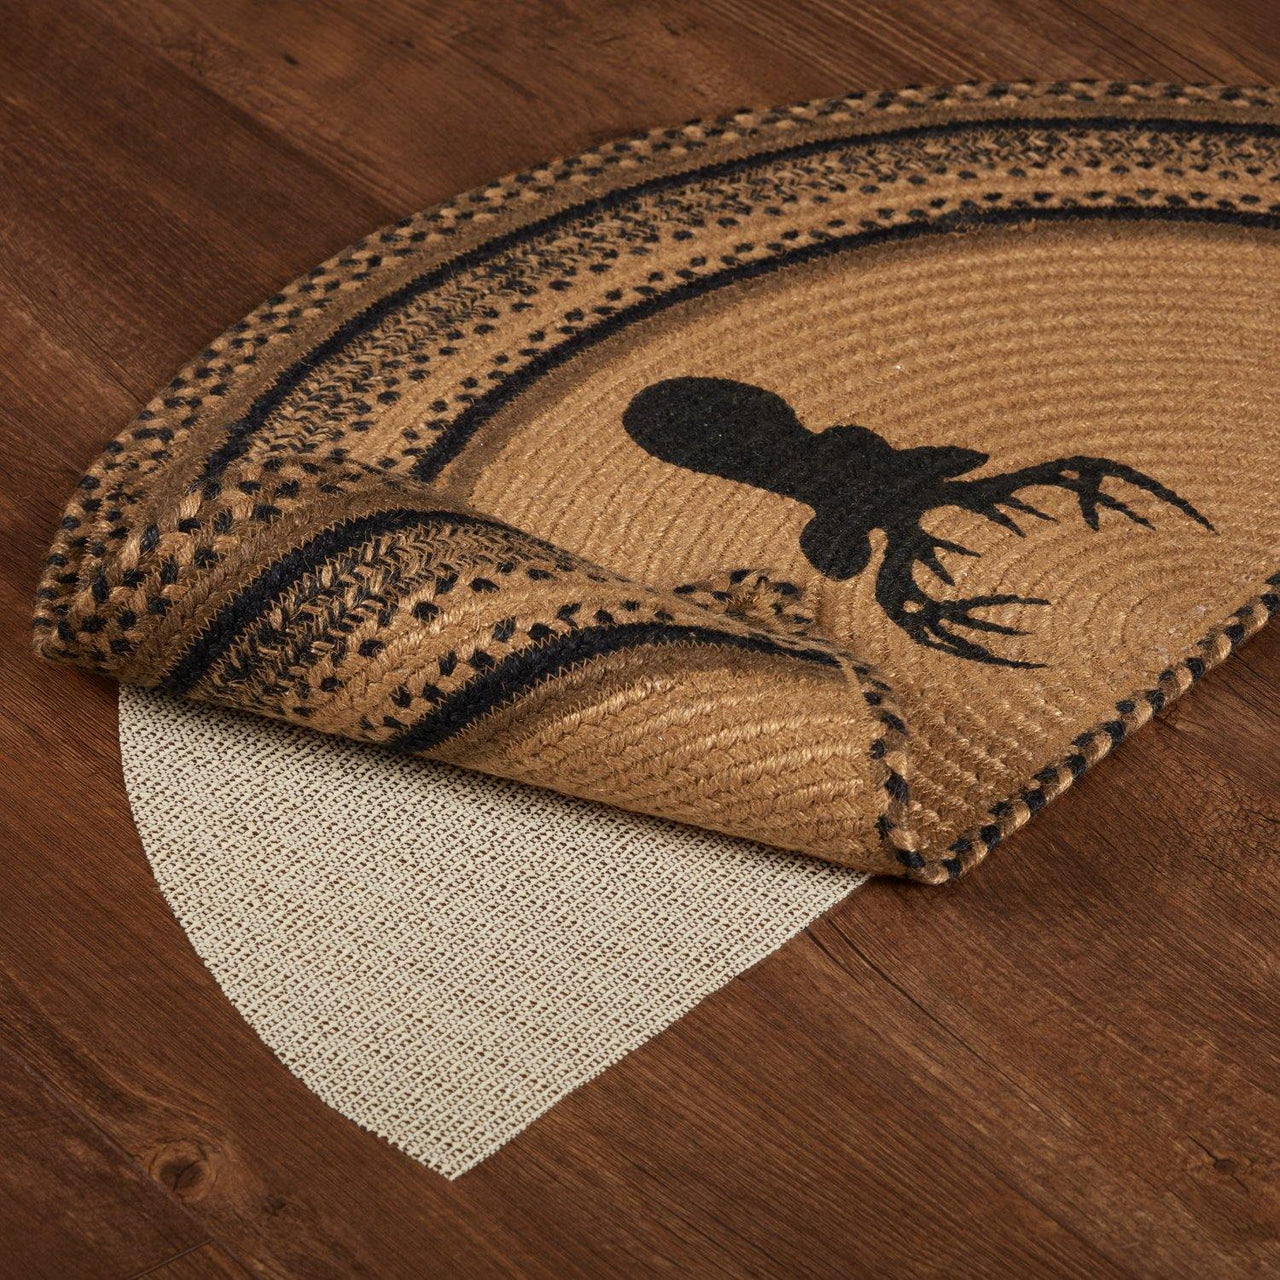 Trophy Mount Jute Braided Rug Half Circle 16.5"x33" with Rug Pad VHC Brands - The Fox Decor